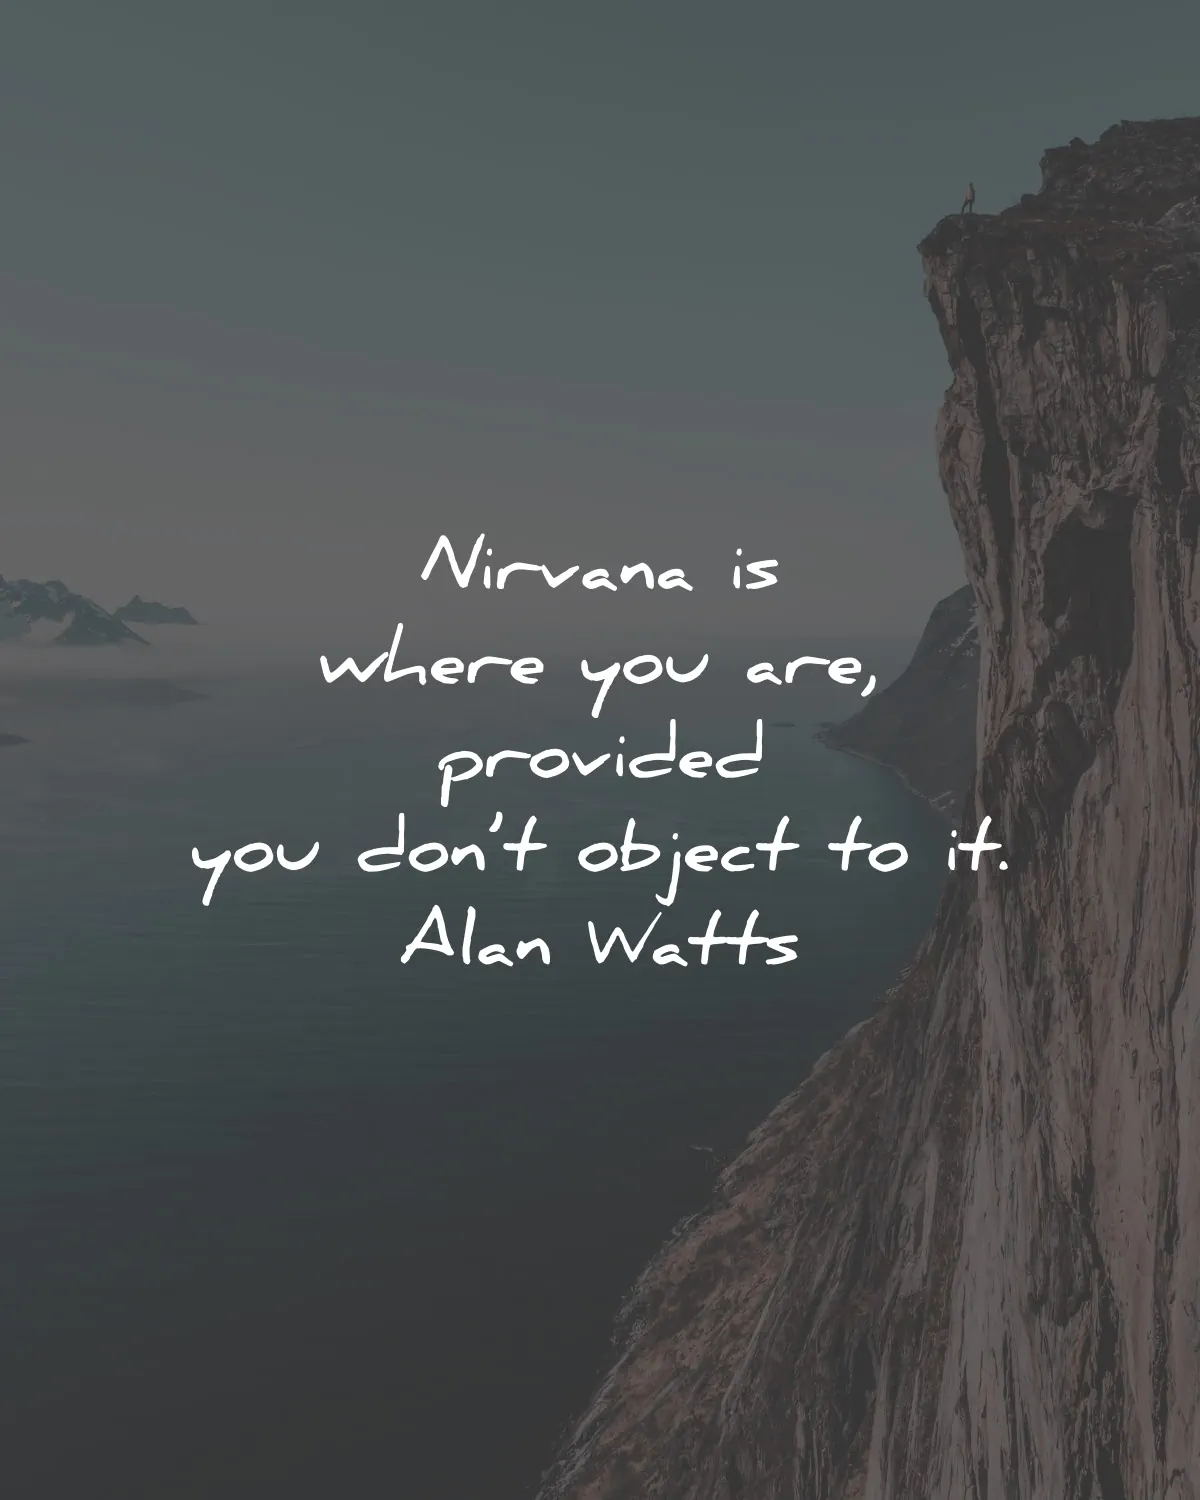 alan watts quotes nirvana where you are object wisdom